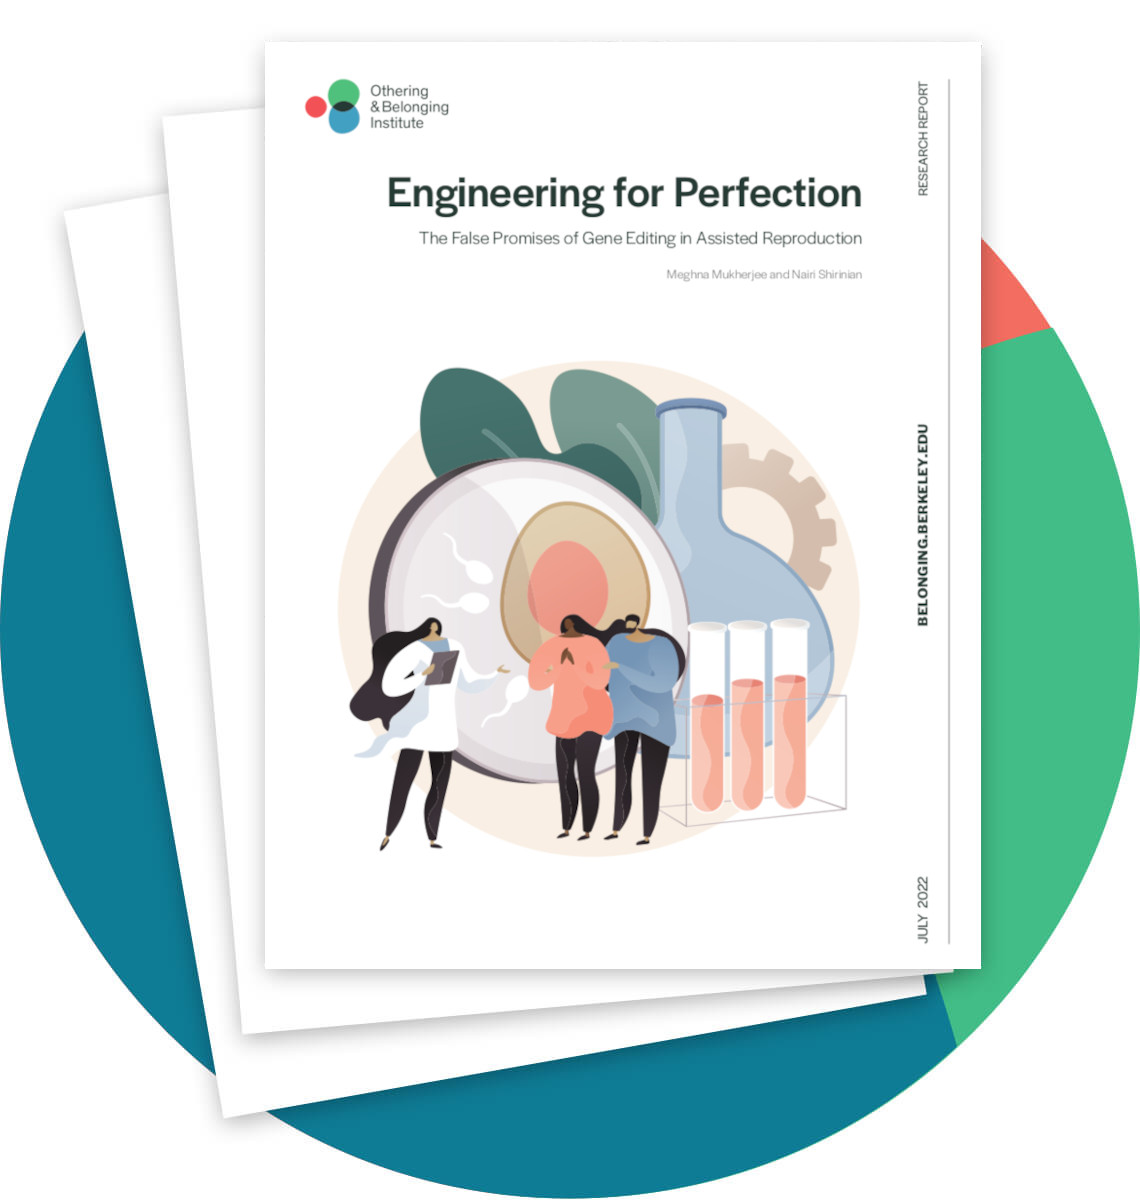 Image show cover image of Engineering for Perfection report